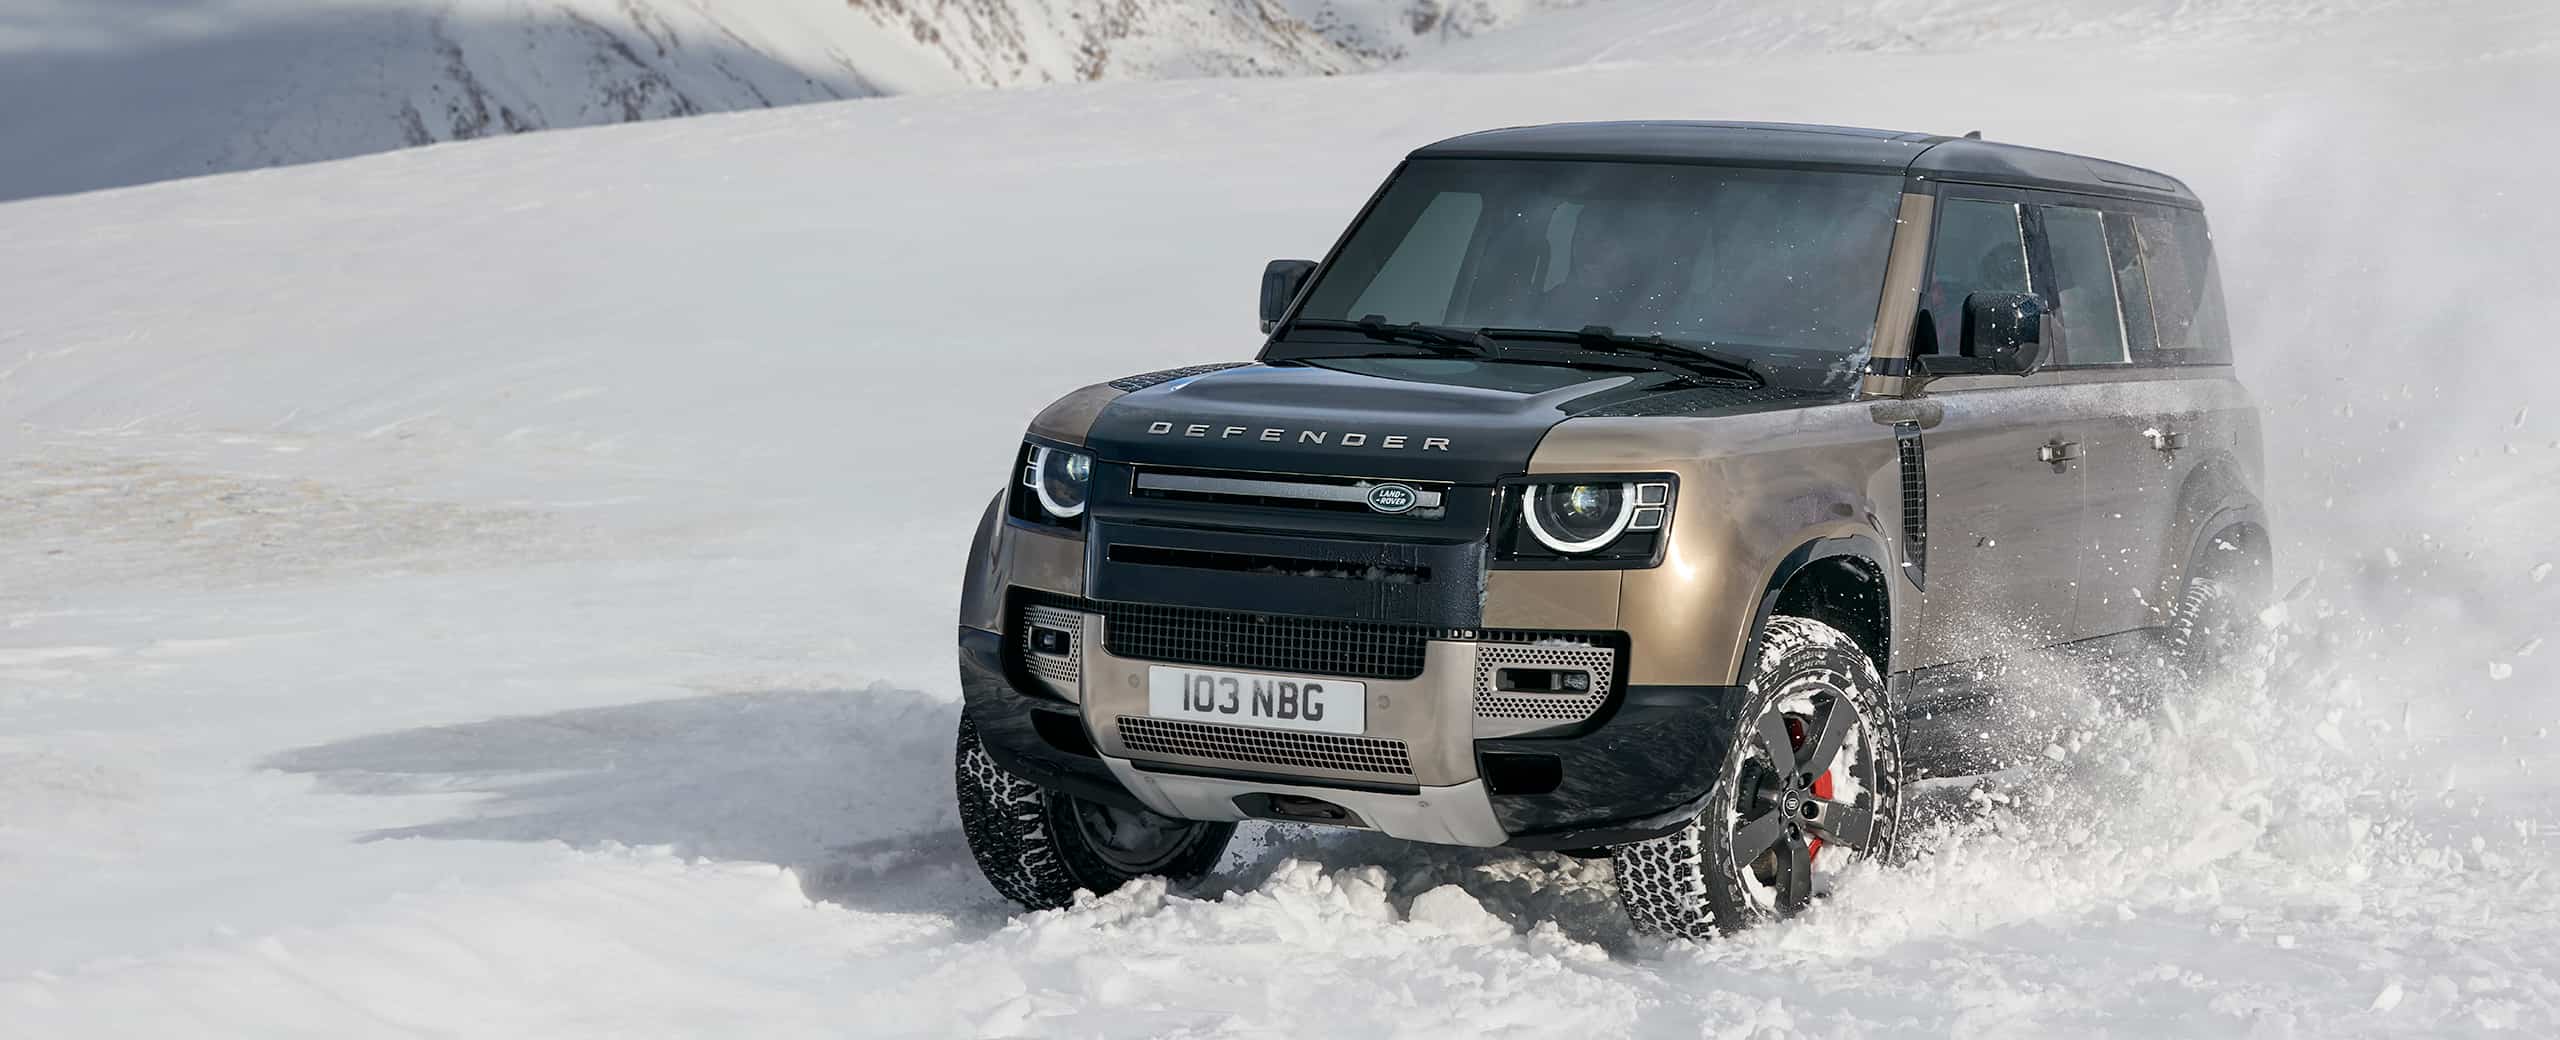 Car Review: The Land Rover Defender X is ready for snow — and anything else  - WTOP News